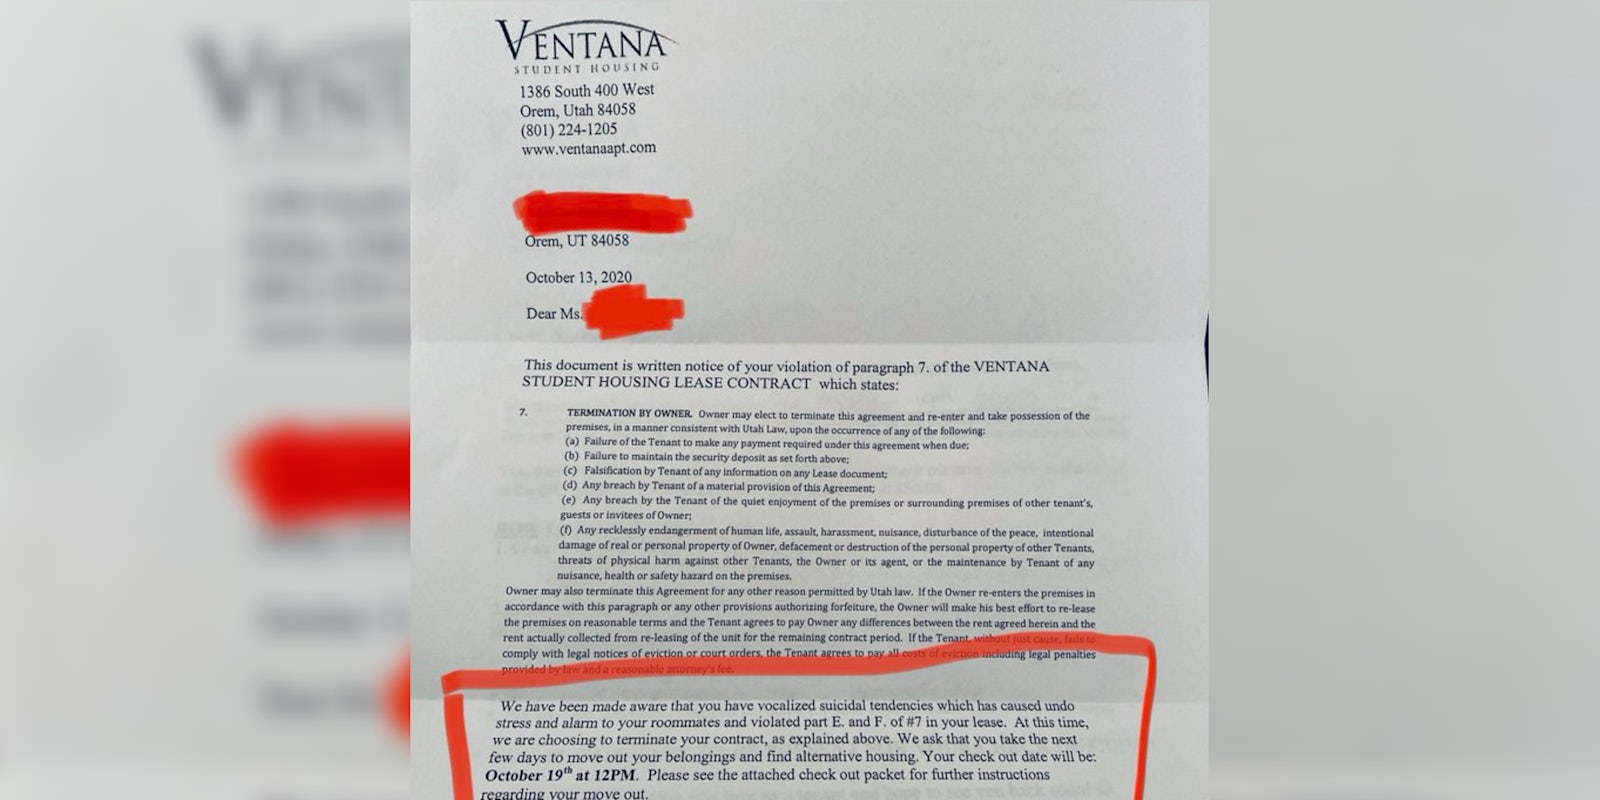 Ventana Student Housing evicting college student suicidal thoughts